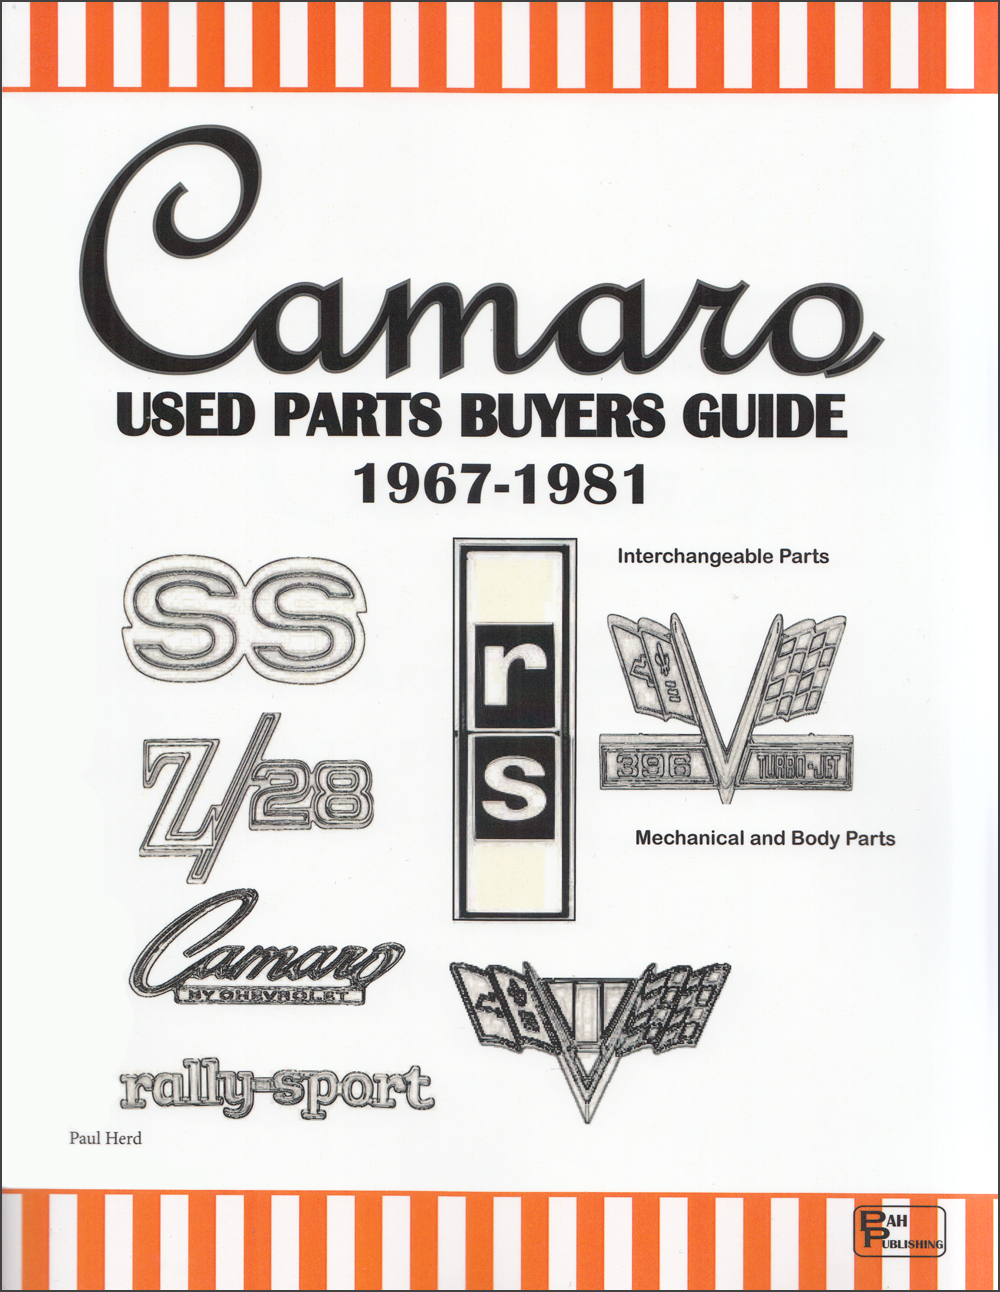 1967-1981 Chevrolet Camaro Used Parts Buyers Guide and Interchange Manual